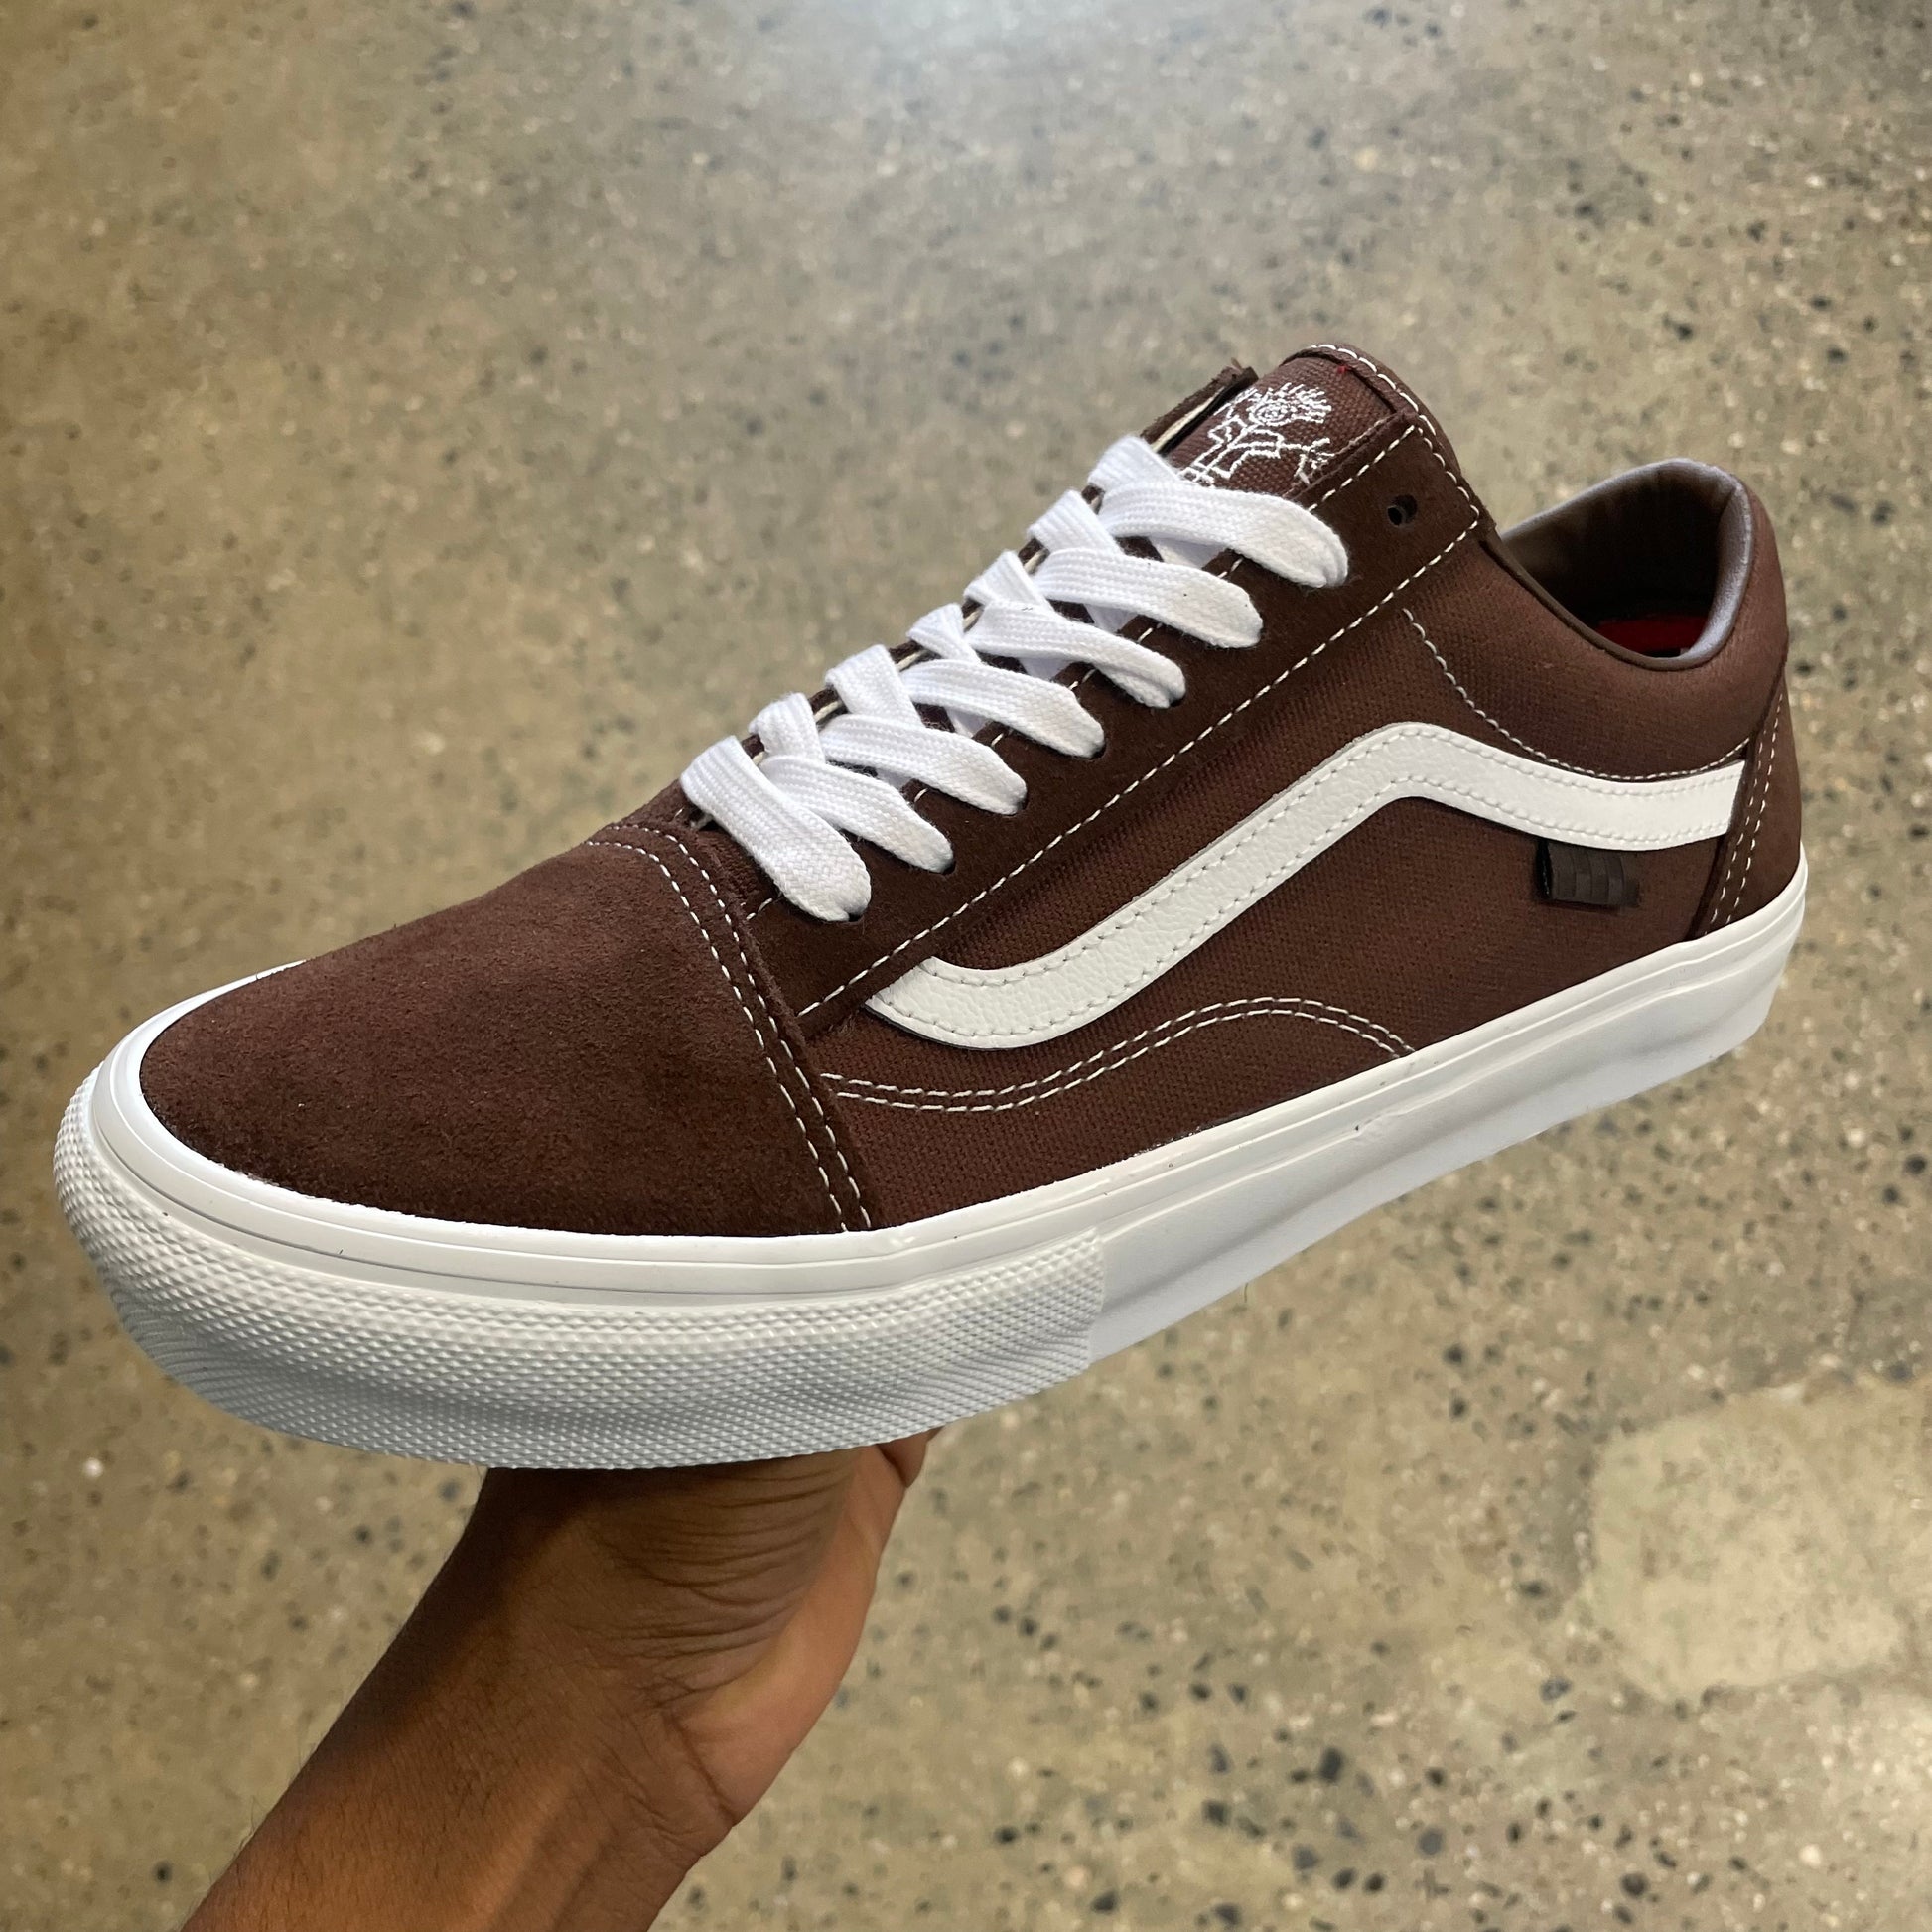 brown suede and canvas skateboard shoe with white outsole